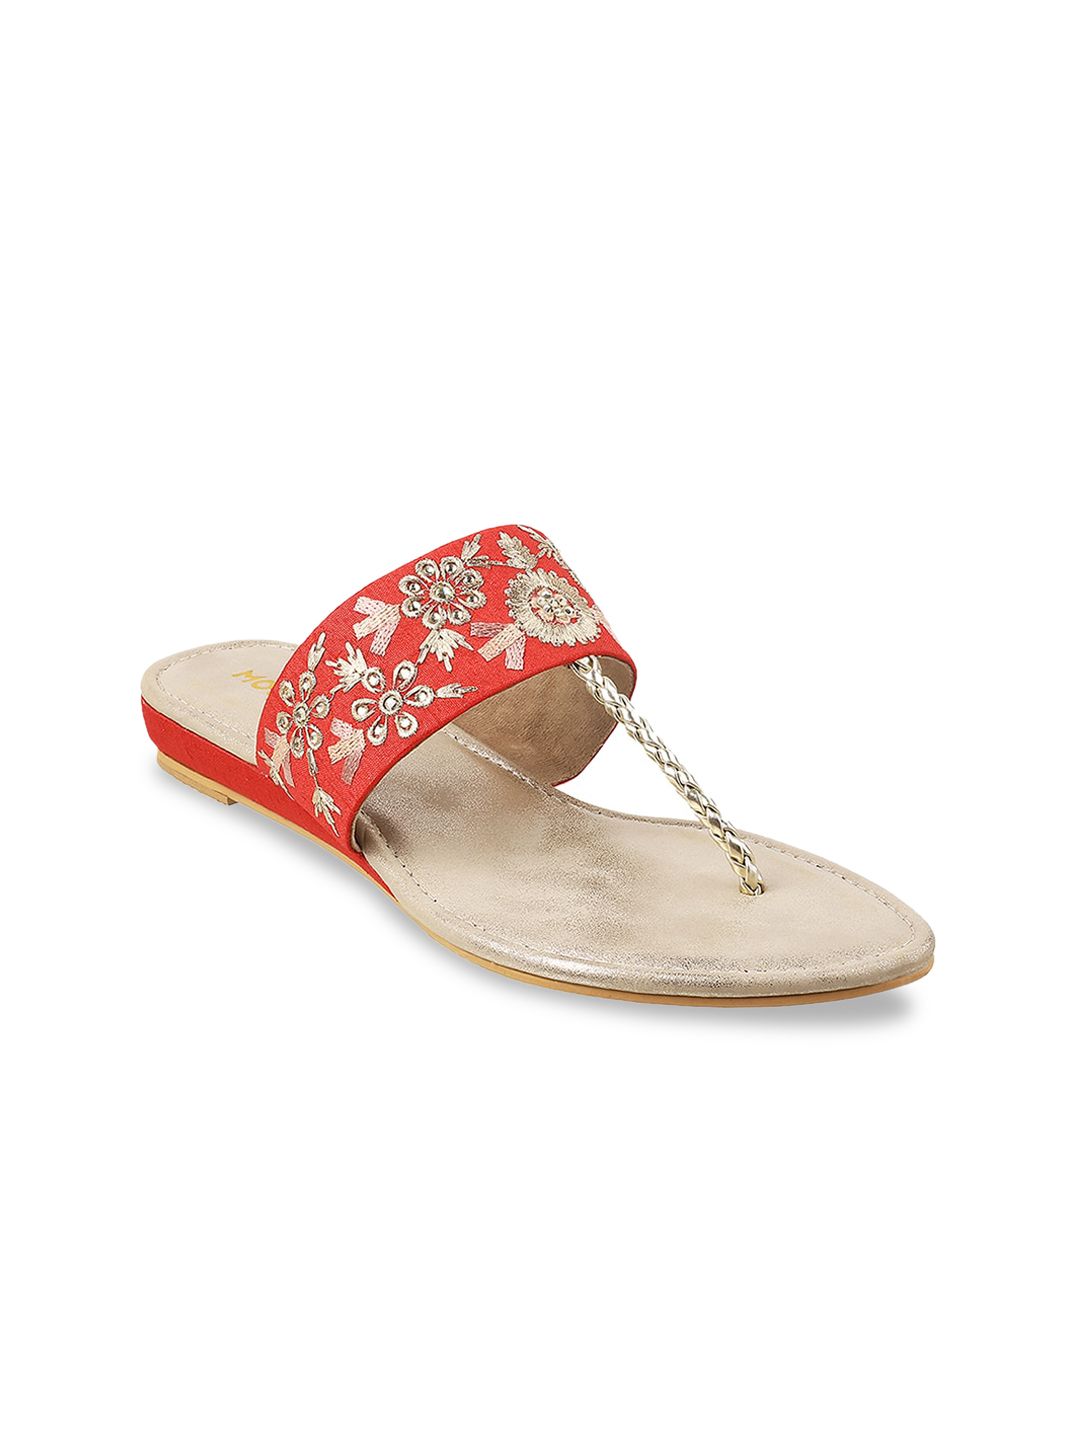 Mochi Woman Red Embellished T-Strap Flats Price in India